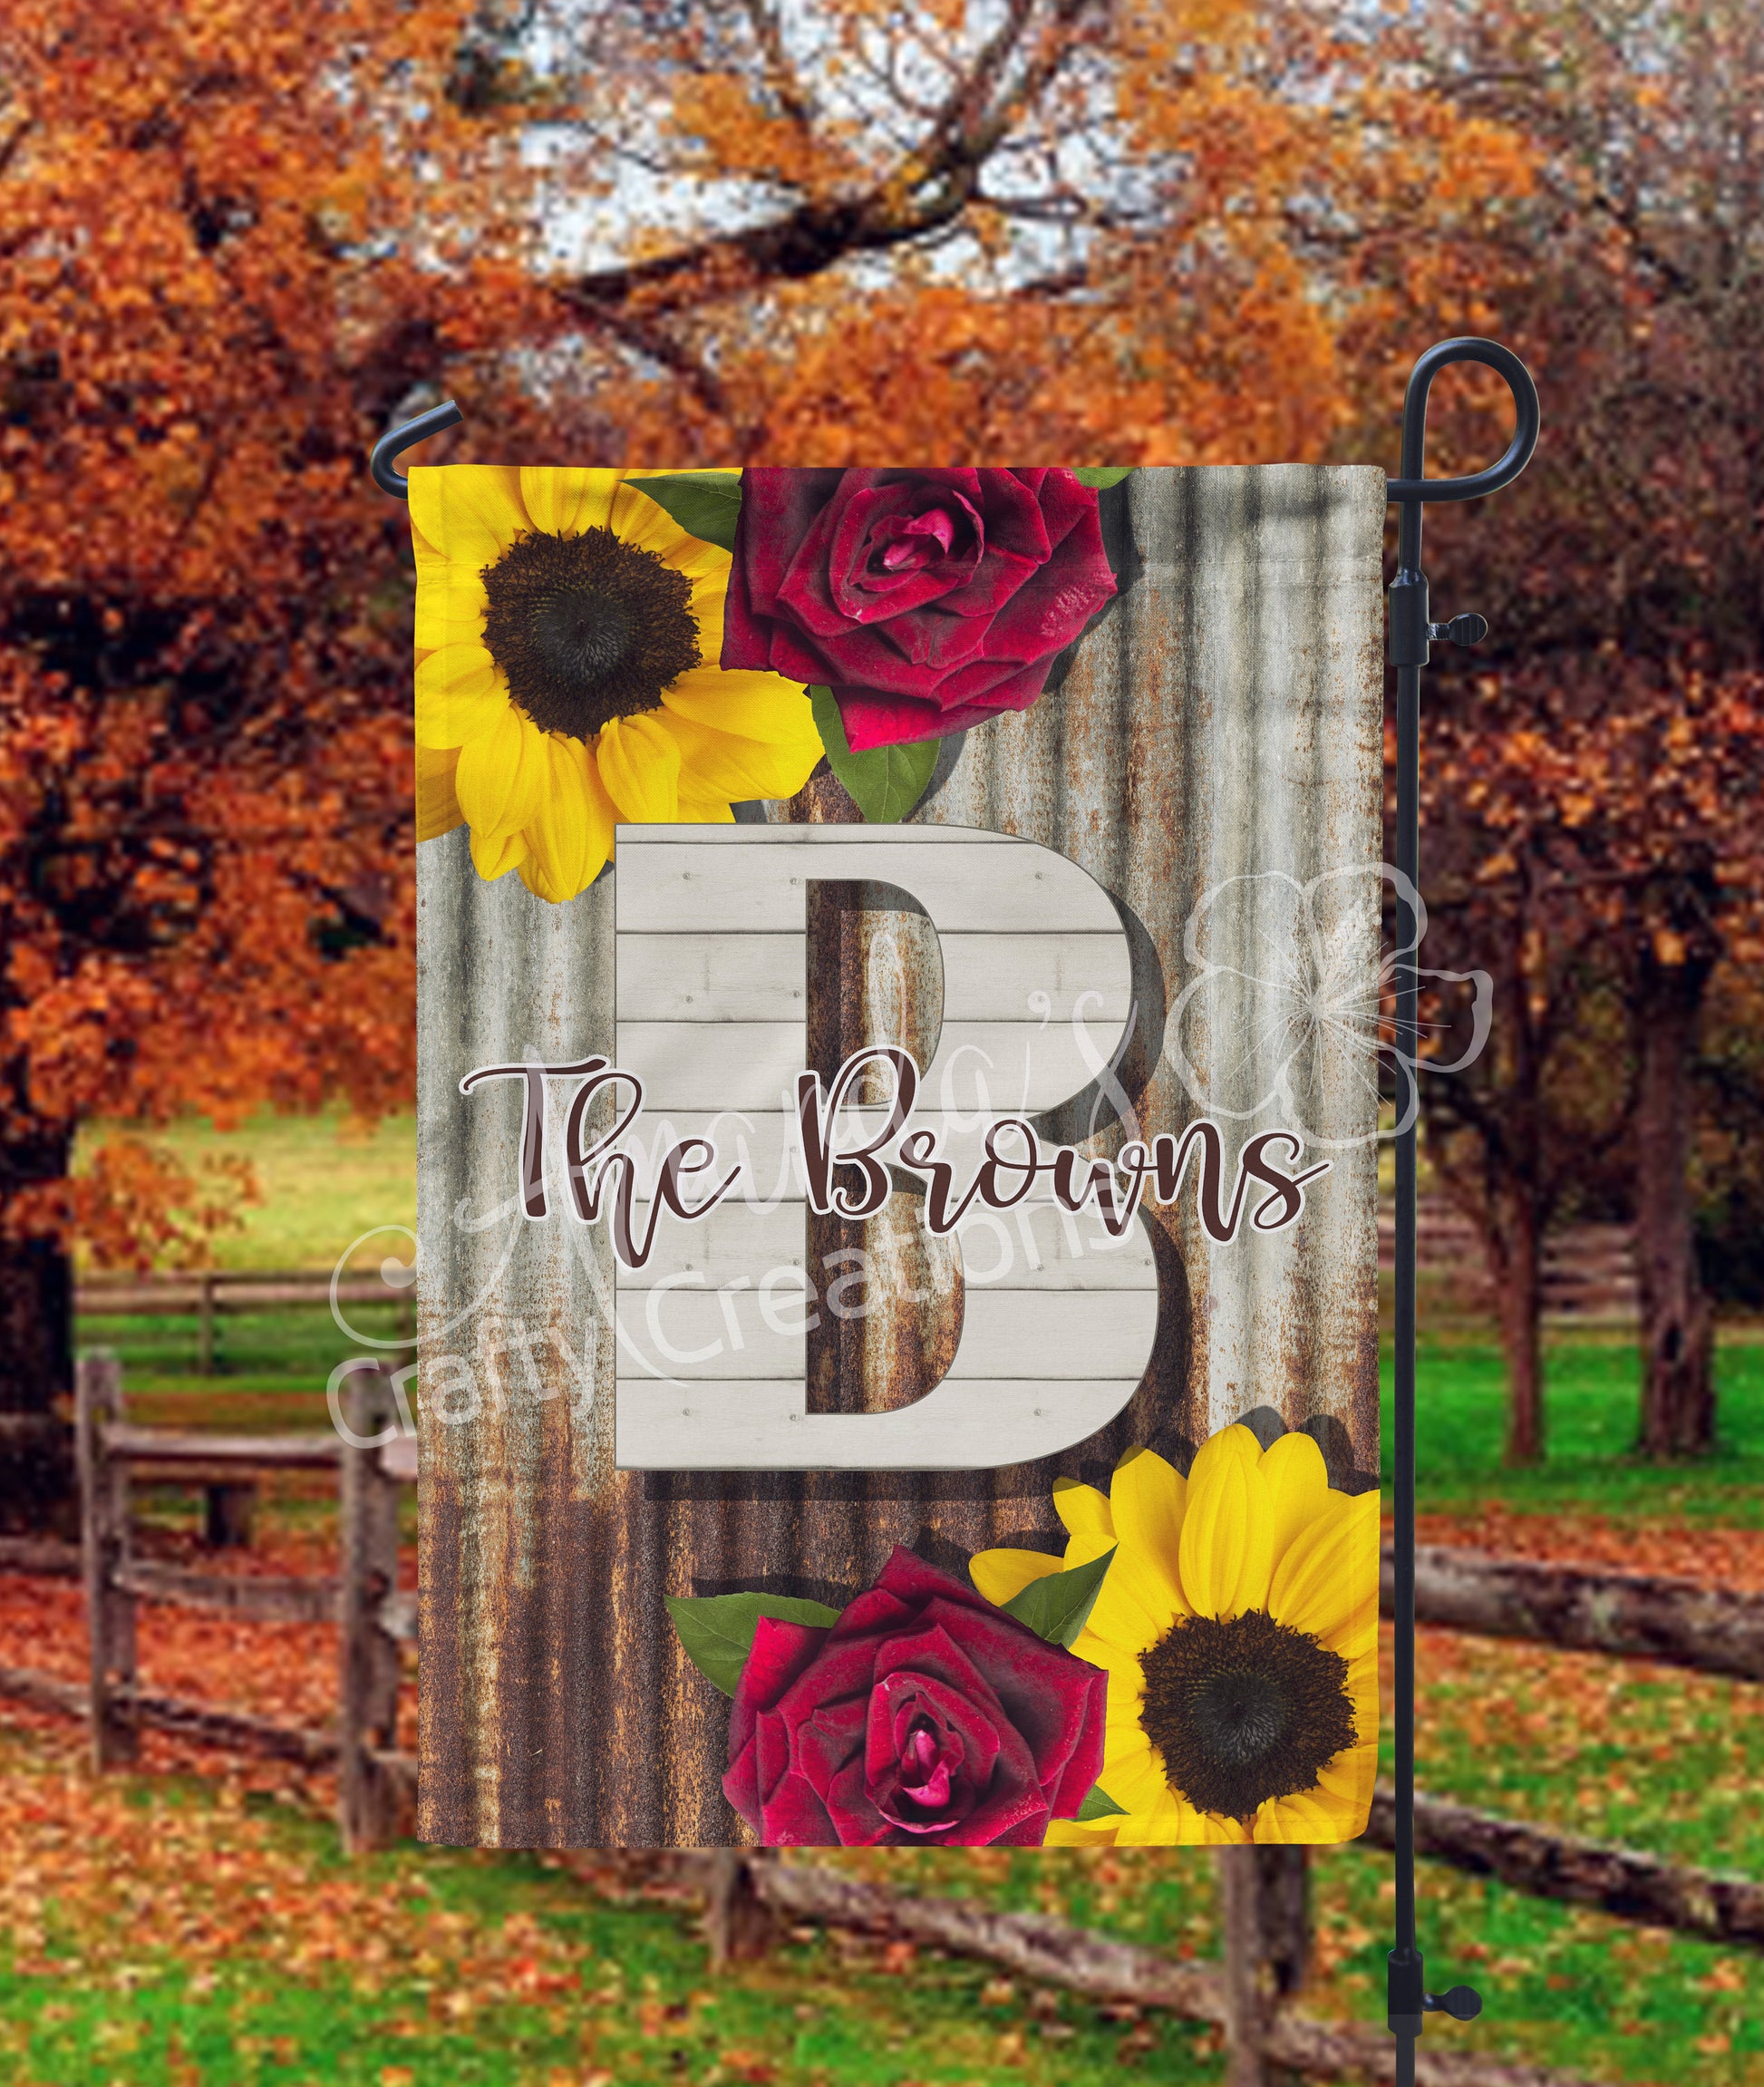 Customizable monogram garden flag with sunflowers and red roses